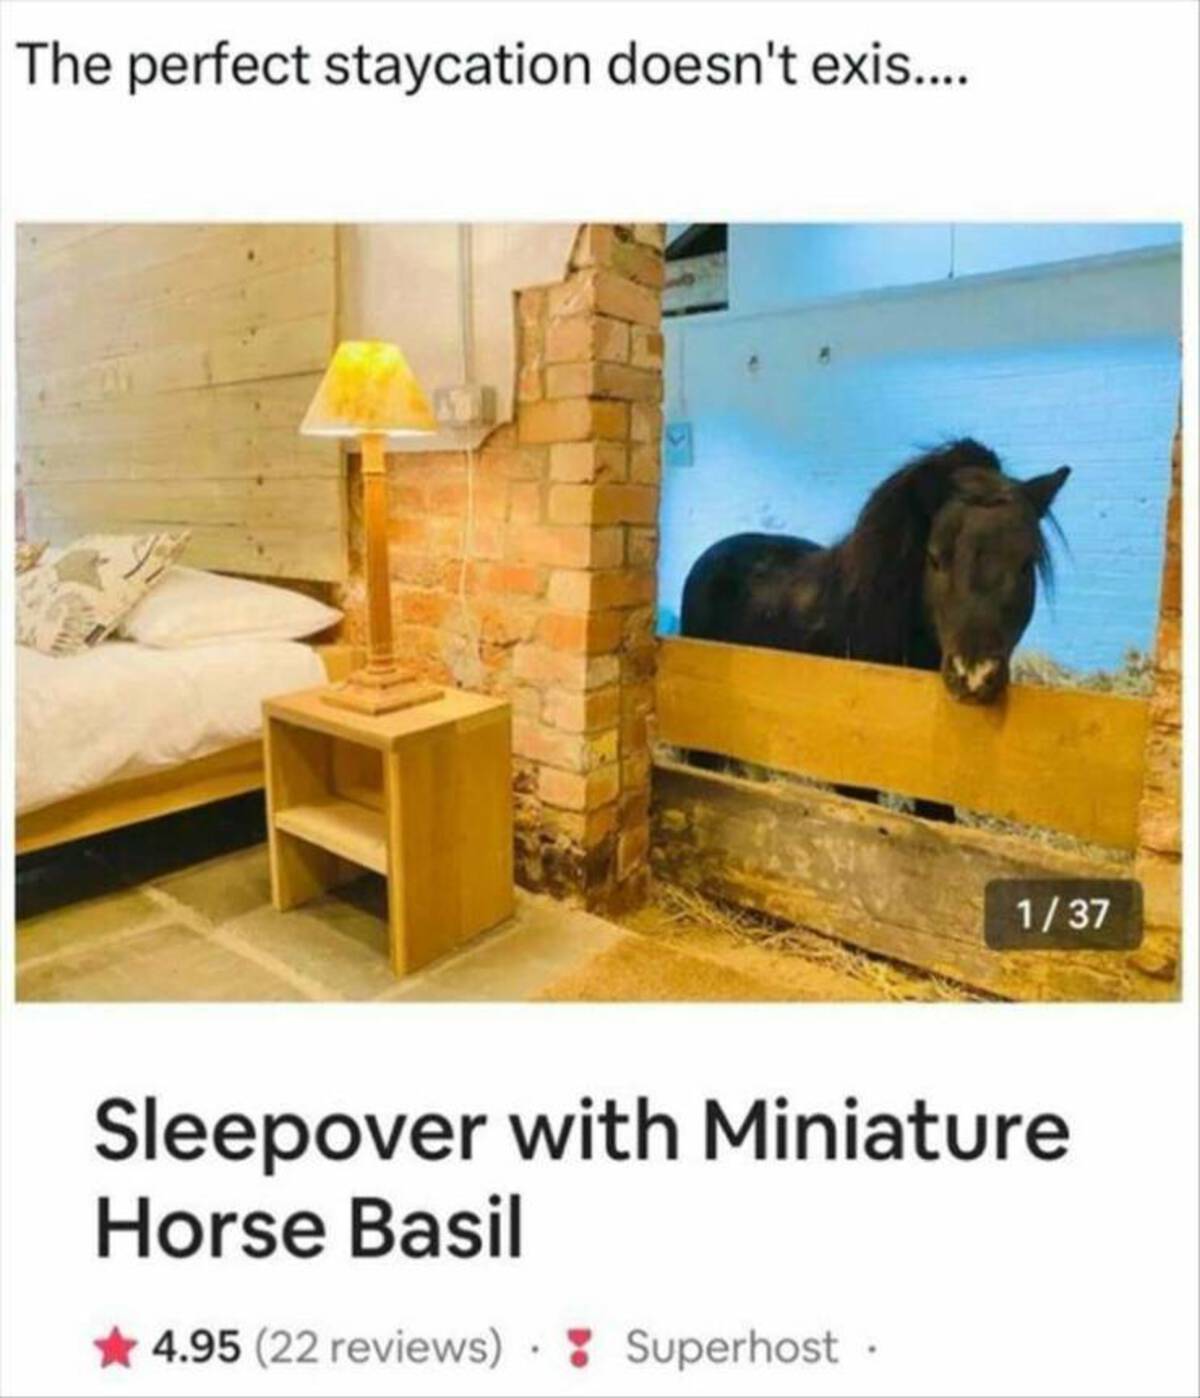 sleepover with miniature horse basil - The perfect staycation doesn't exis.... 137 Sleepover with Miniature Horse Basil 4.95 22 reviews Superhost